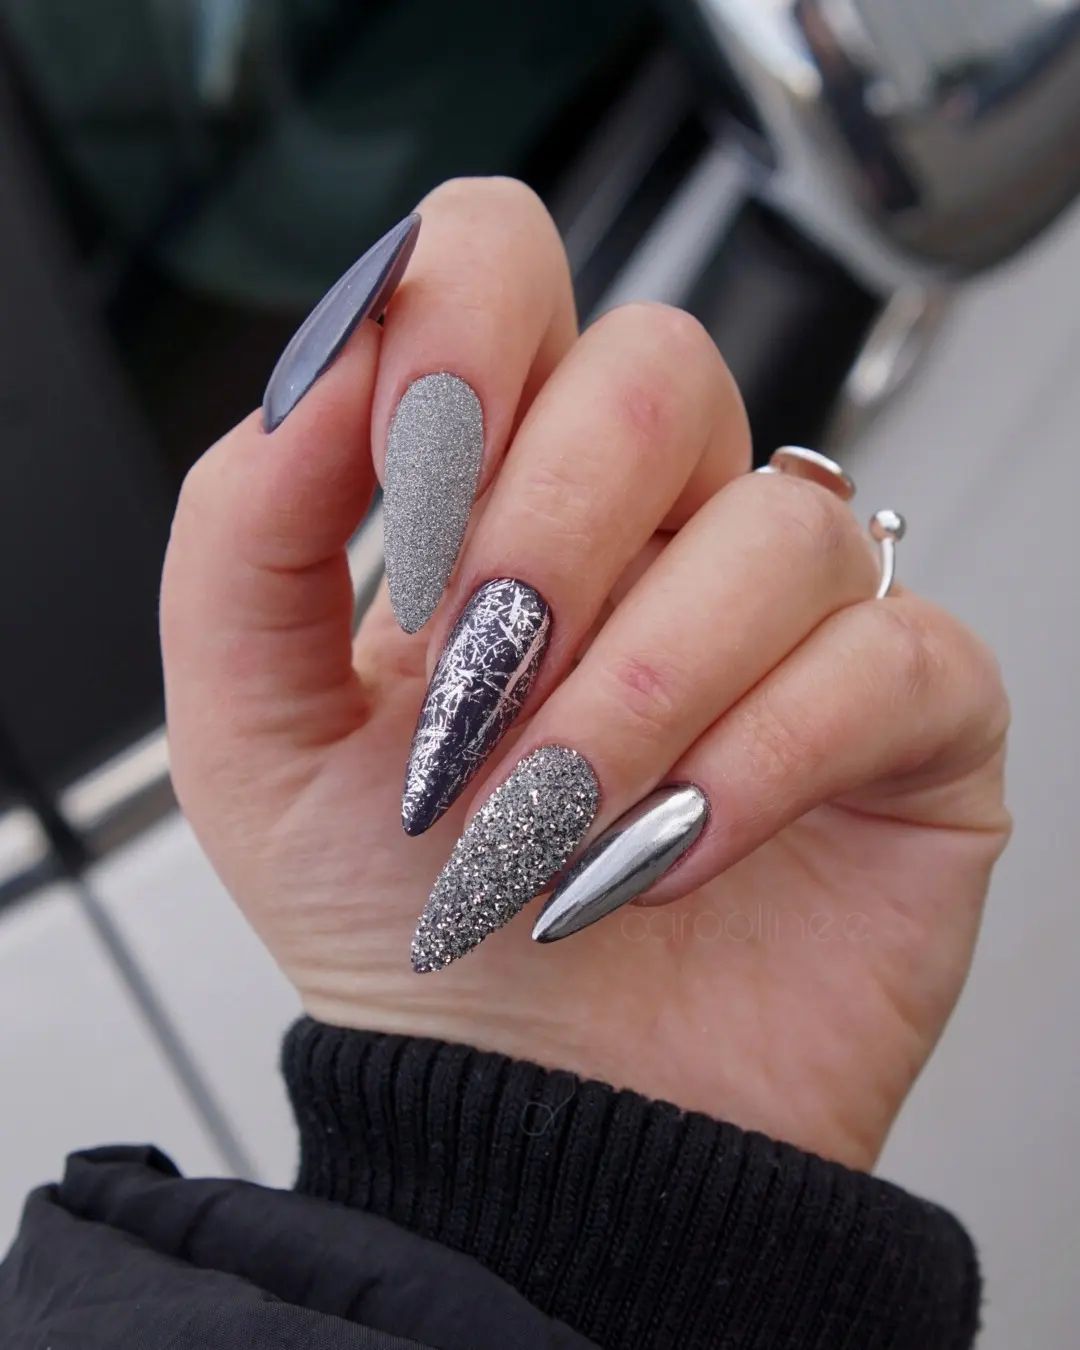 Long Silver Glitter Nails with Metallic Design